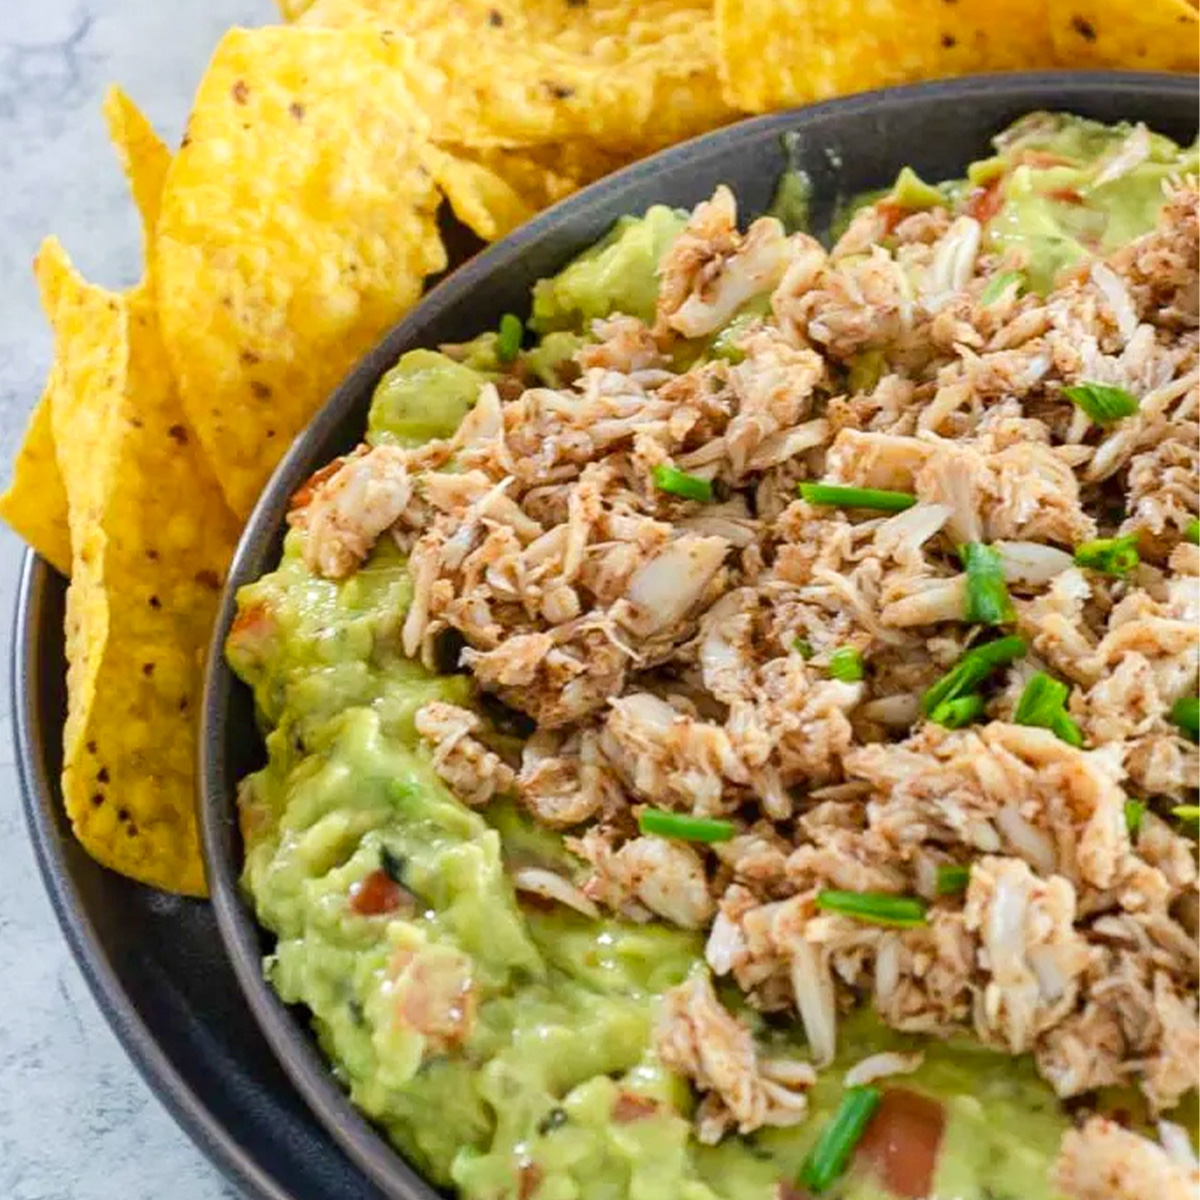 A dish of spicy crab guacamole surrounded by tortilla chips.